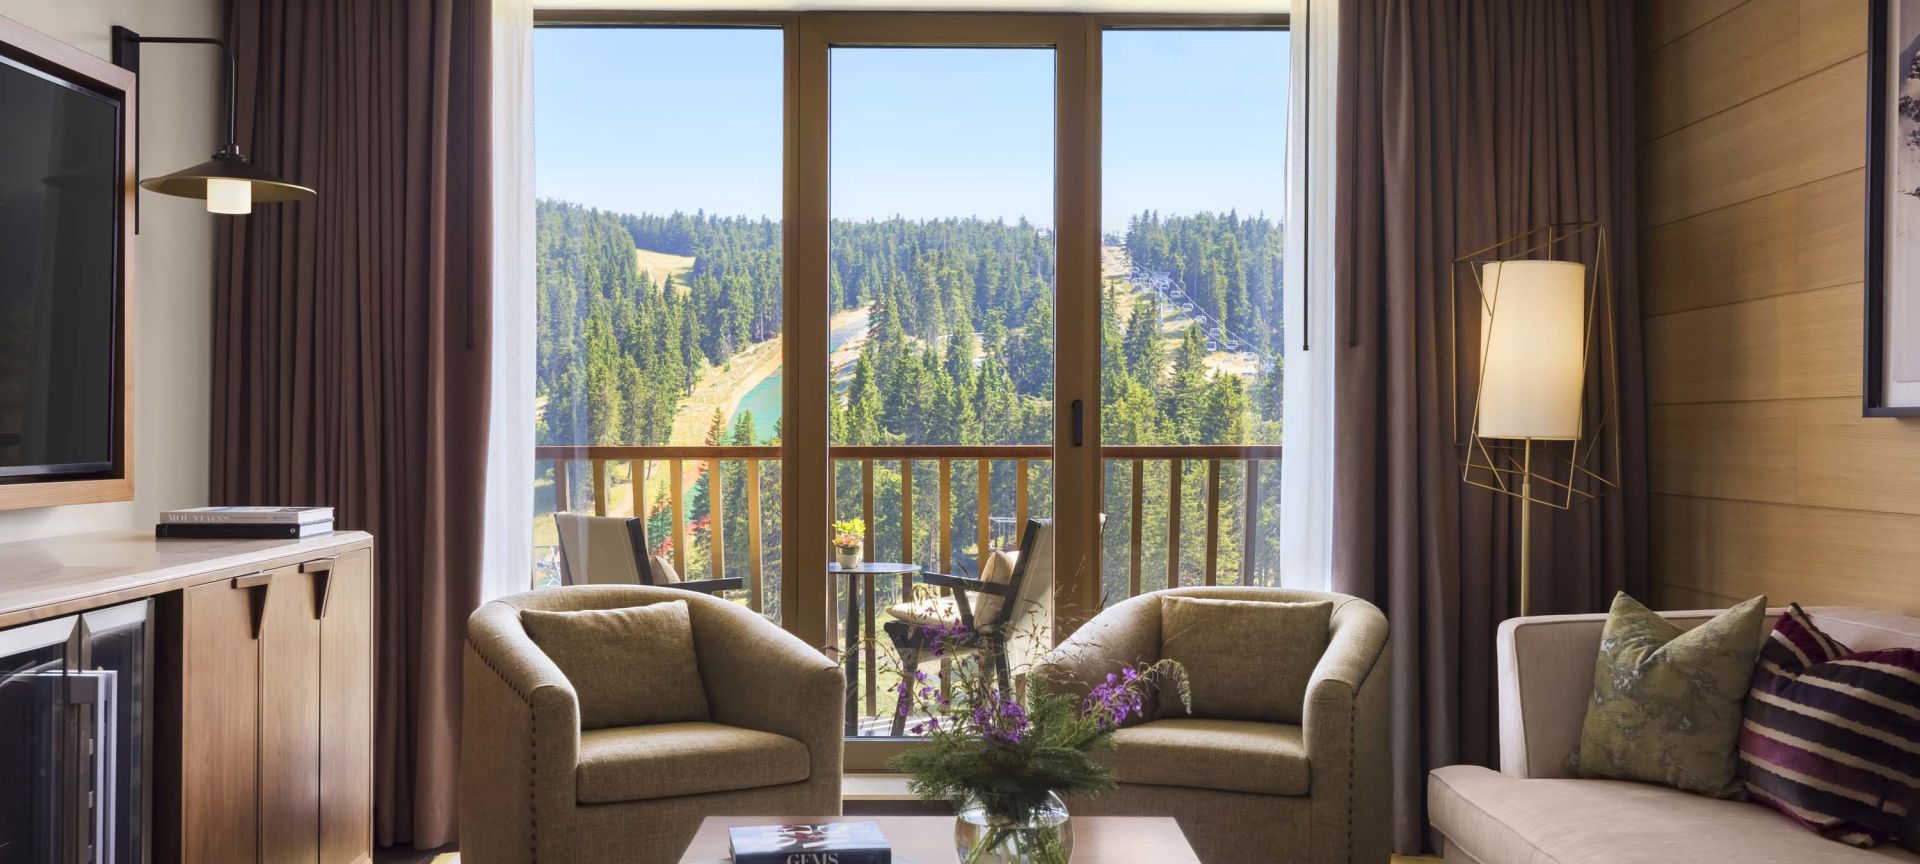 Karaman Suite living area with mountain view